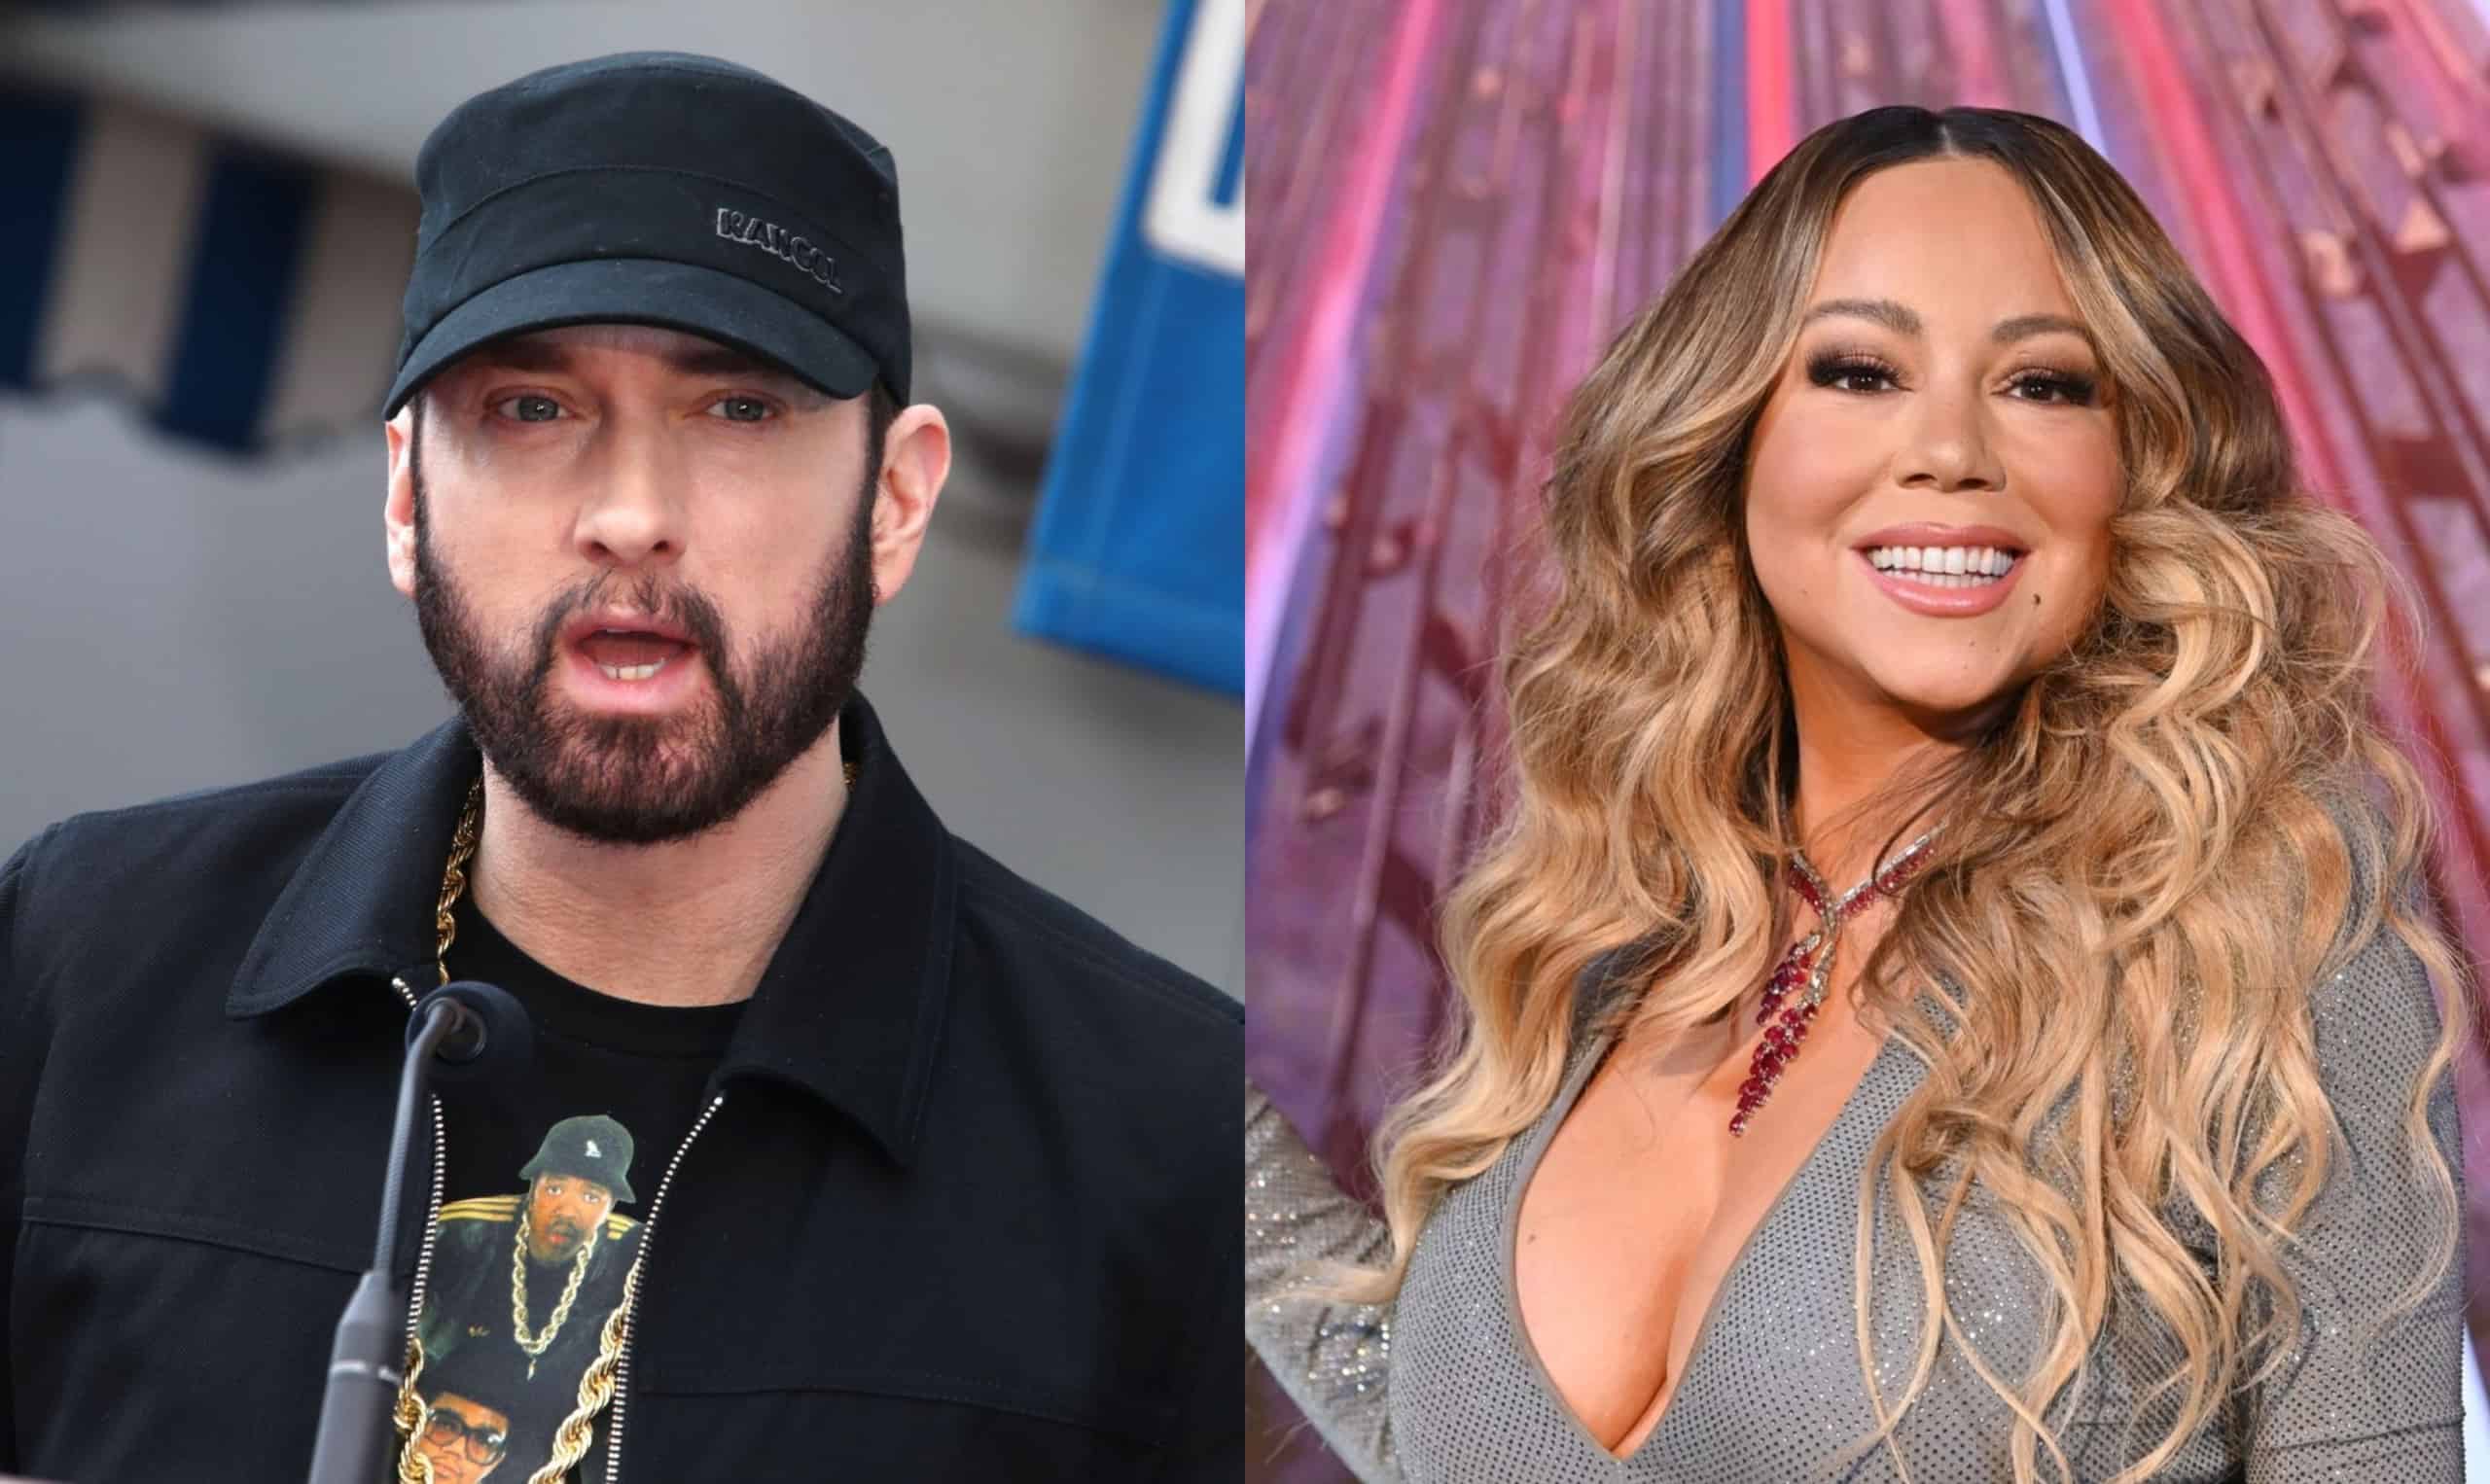 Is Eminem Upset Over Upcoming Mariah Carey Book Might Reveal Details About Him